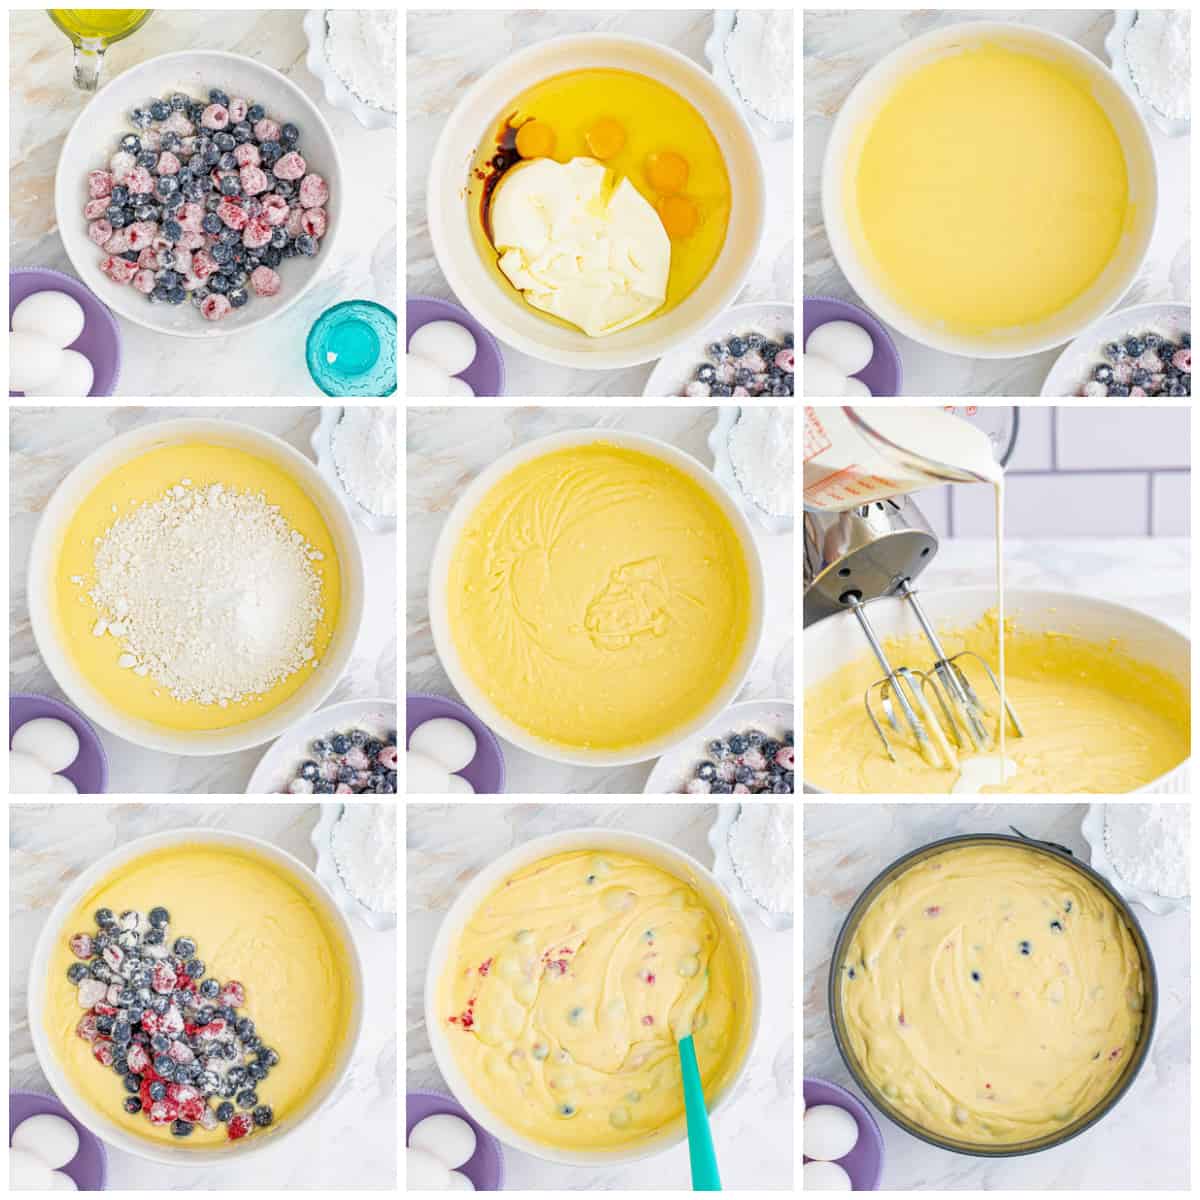 Step by step photos on how to make Berry Ricotta Cake